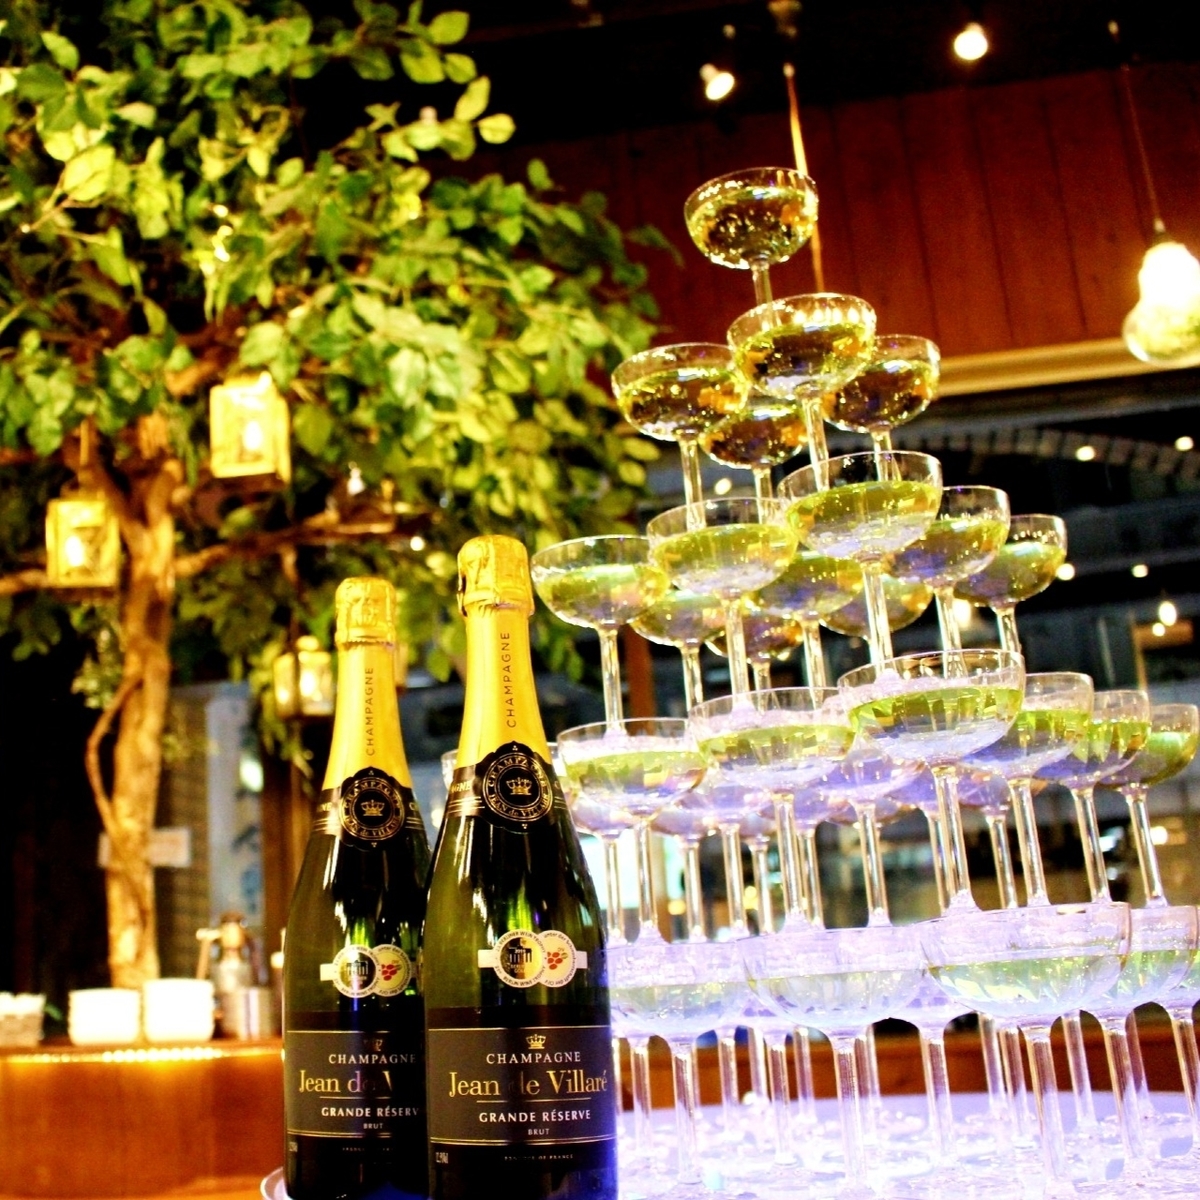 A charter party in Shibuya Perfect for a birthday party with a champagne tower